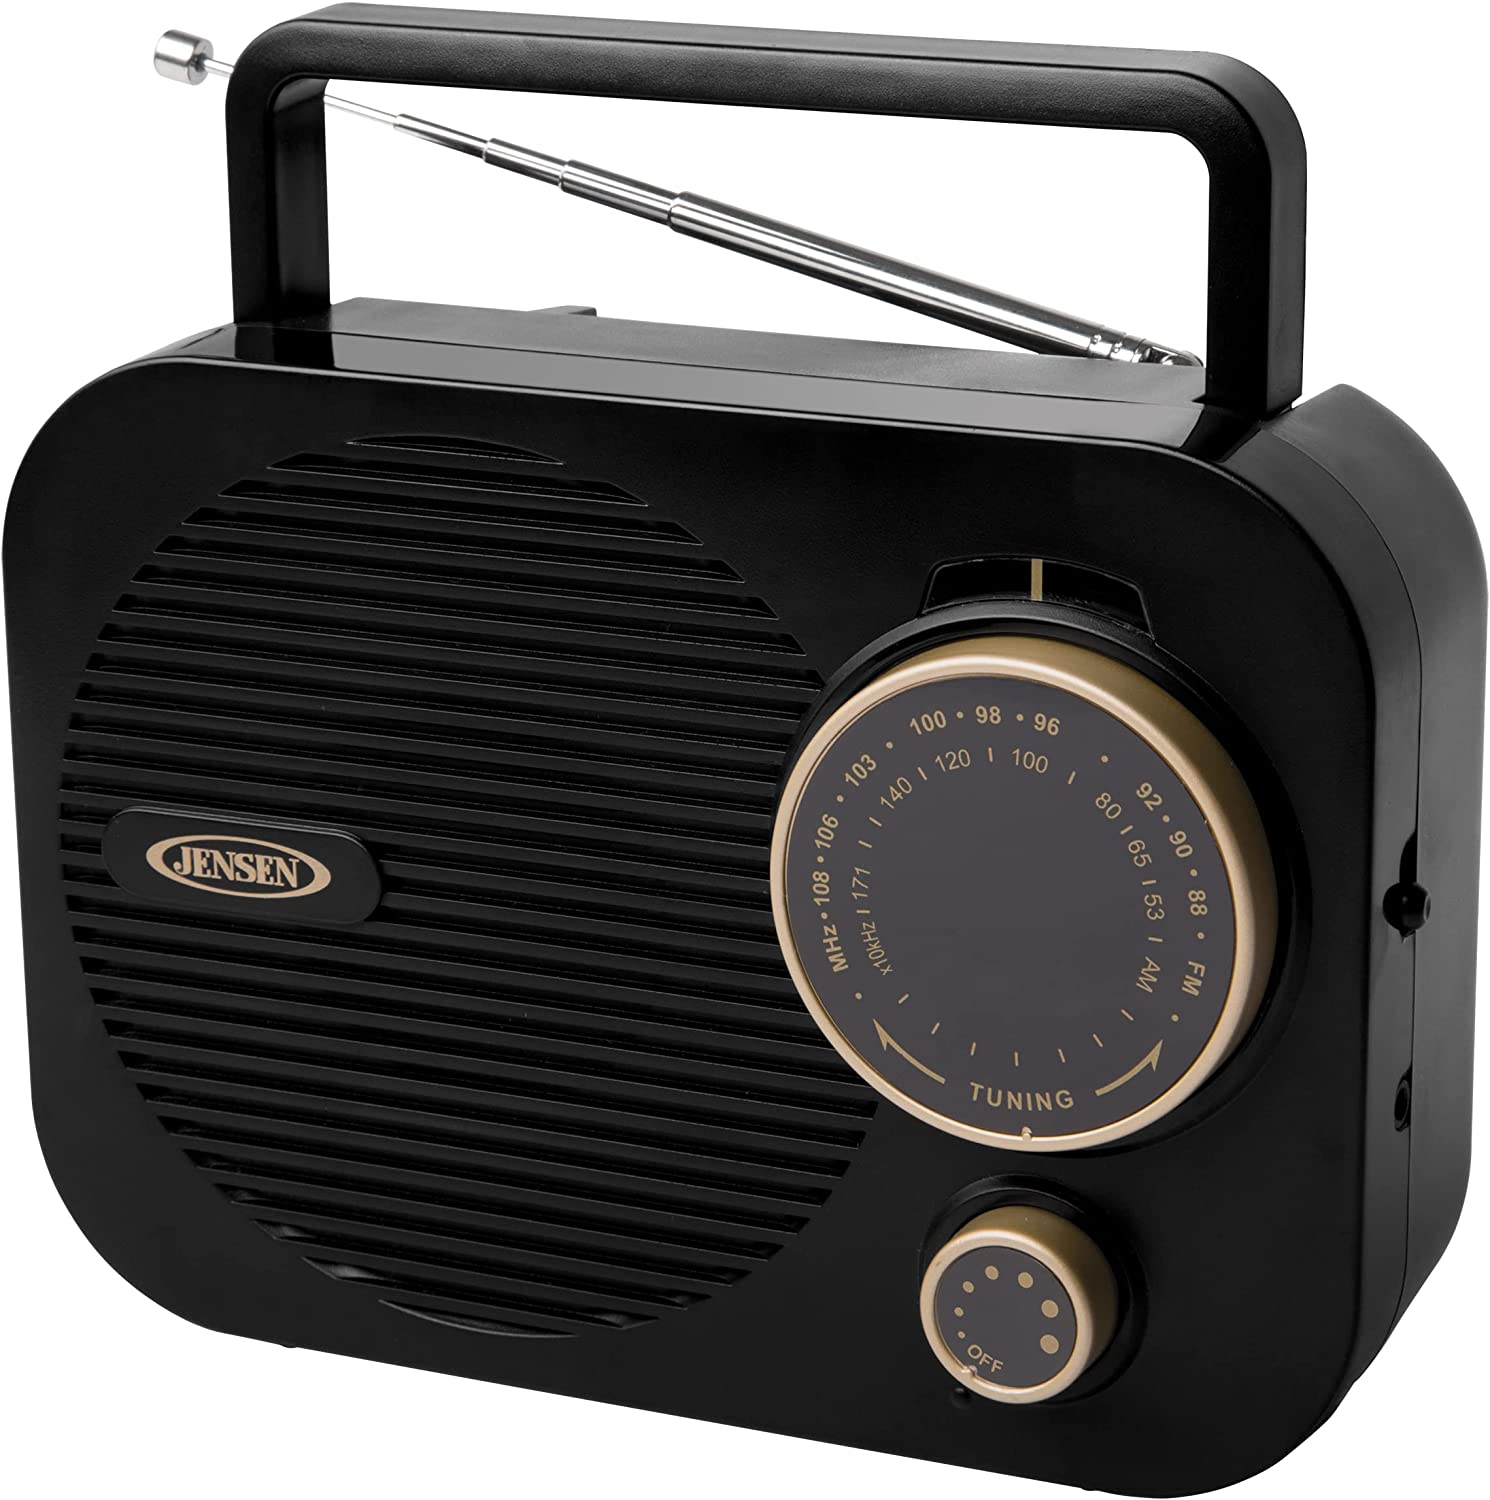 Jensen MR-550 Gold Modern Portable AM/FM Radio, Vintage Retro Rotary Dial with Built in Speakers + Aux Line-in, Power Plug or 4 x ‘C’ Batteries – (Limited Edition)